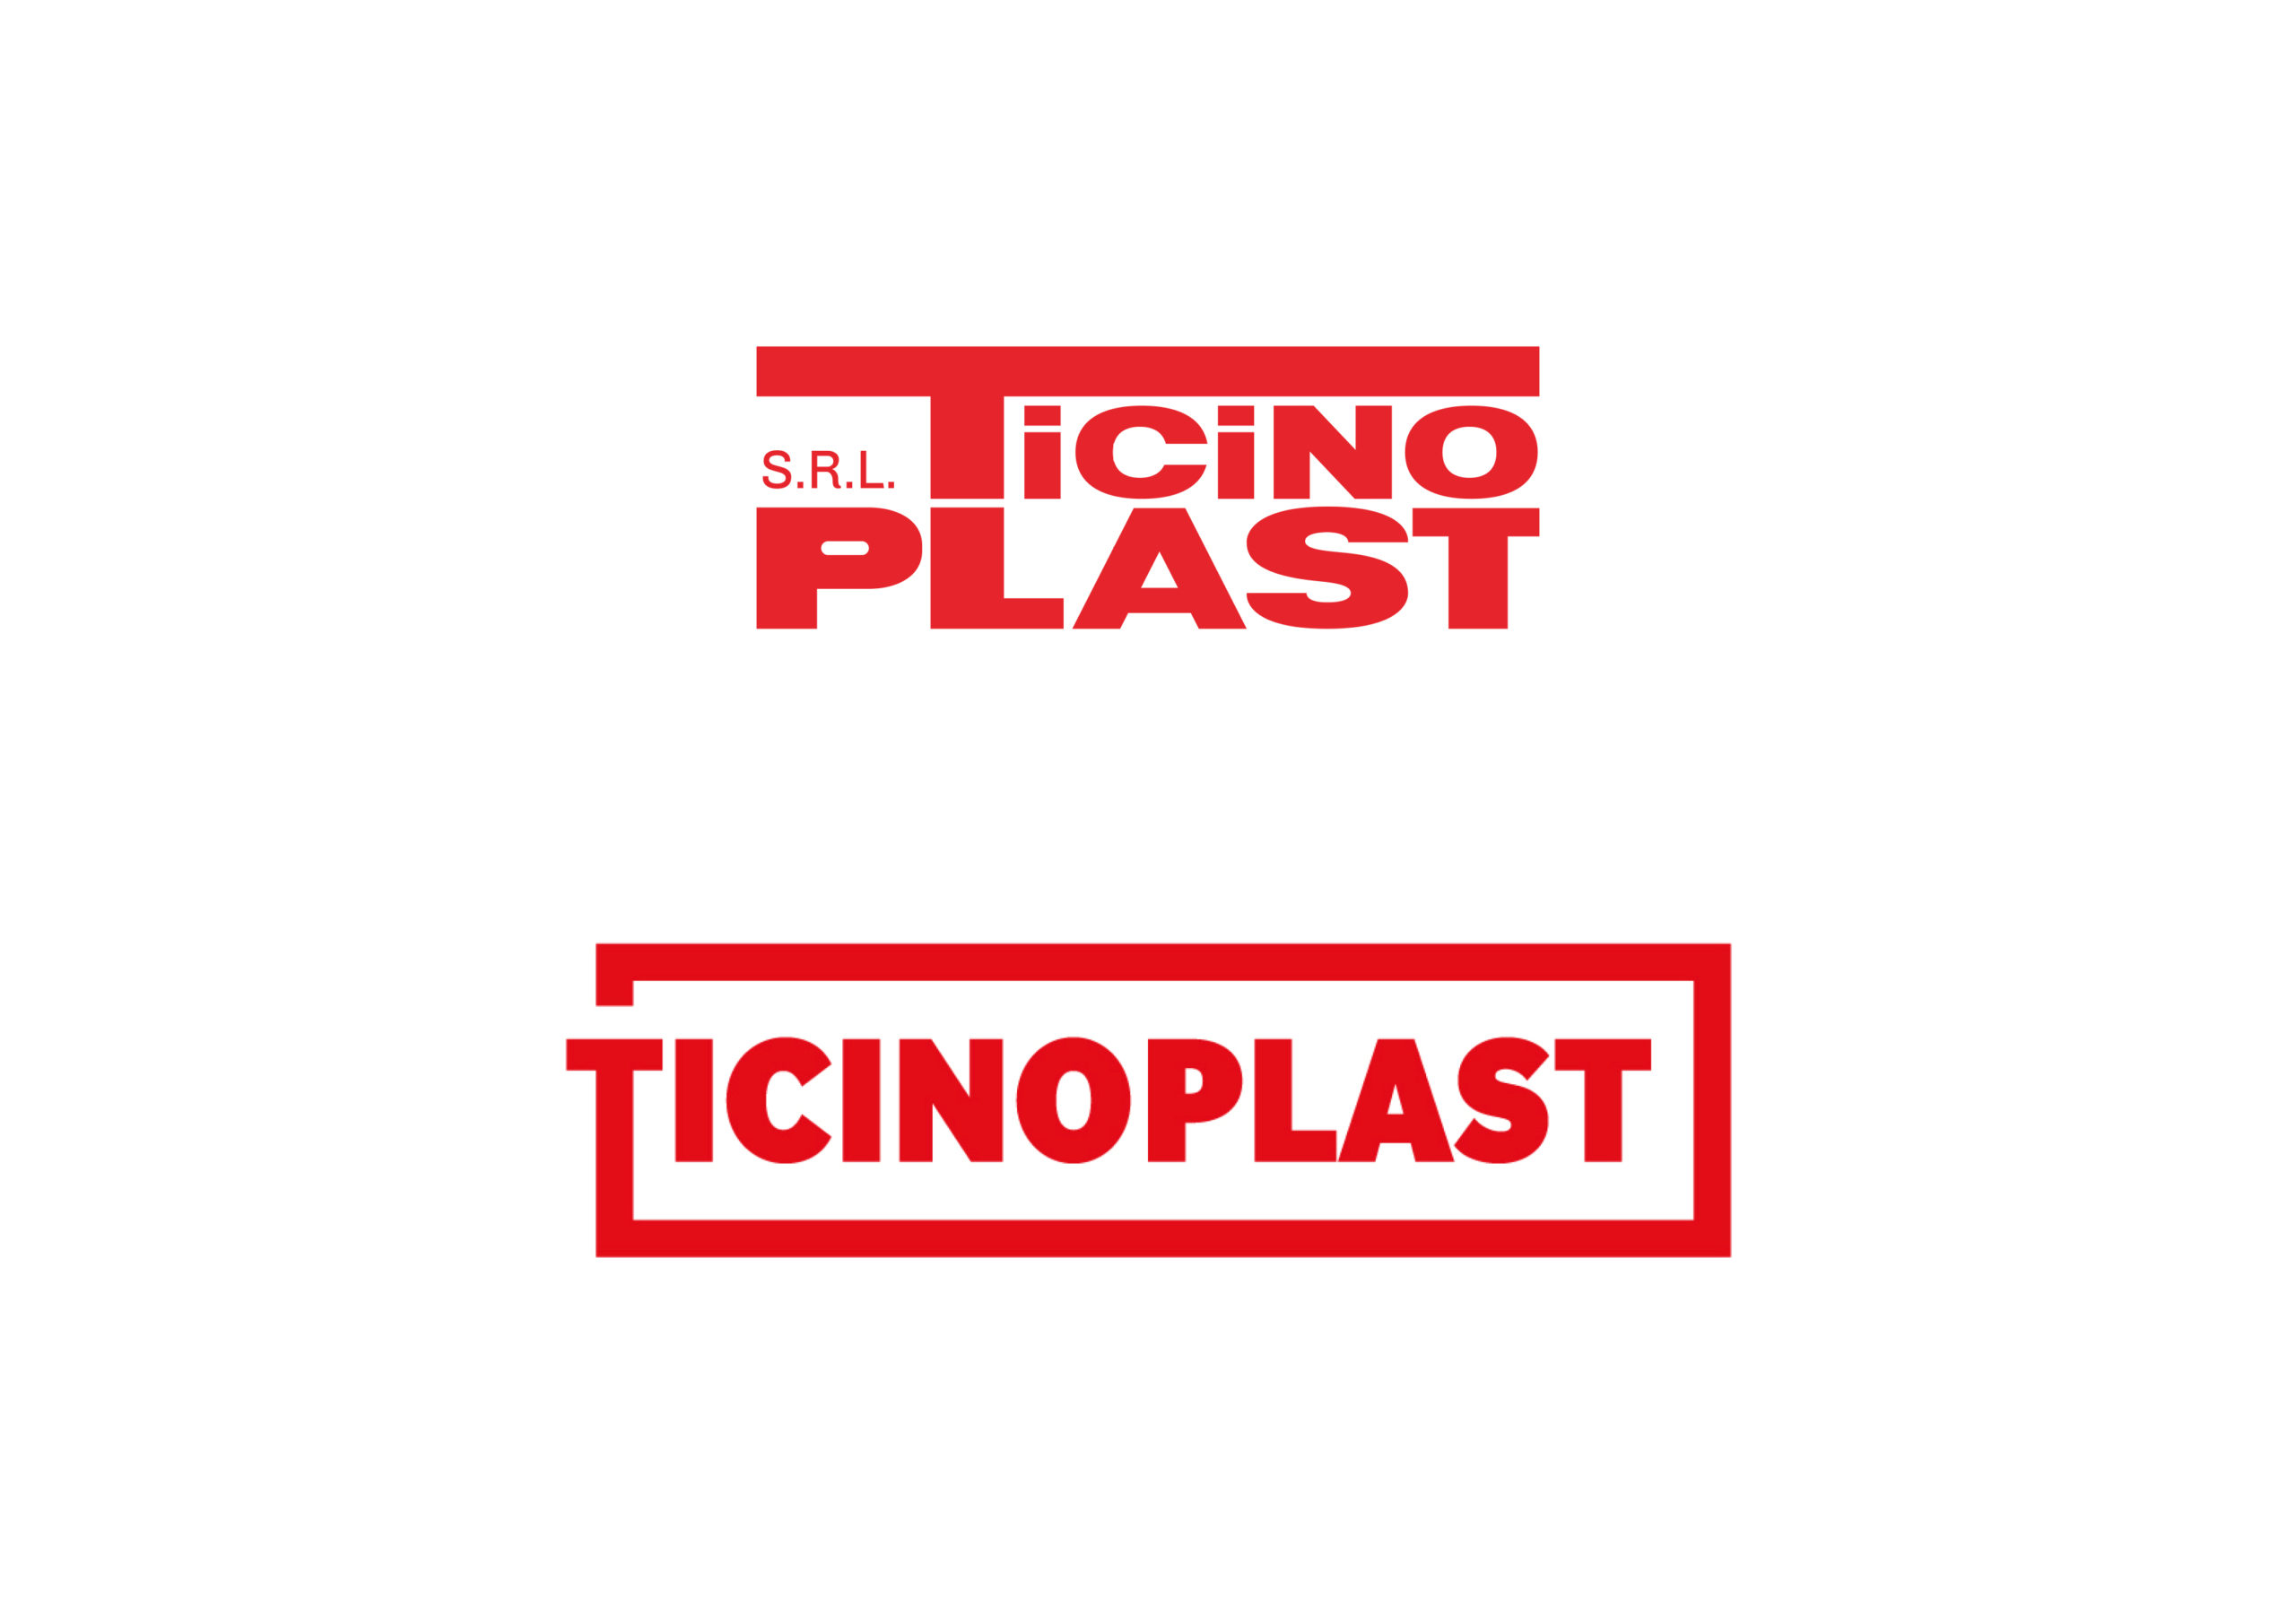 TICINOPLAST RENEWS ITS LOGO AND CHANGES ITS LEGAL ENTITY.